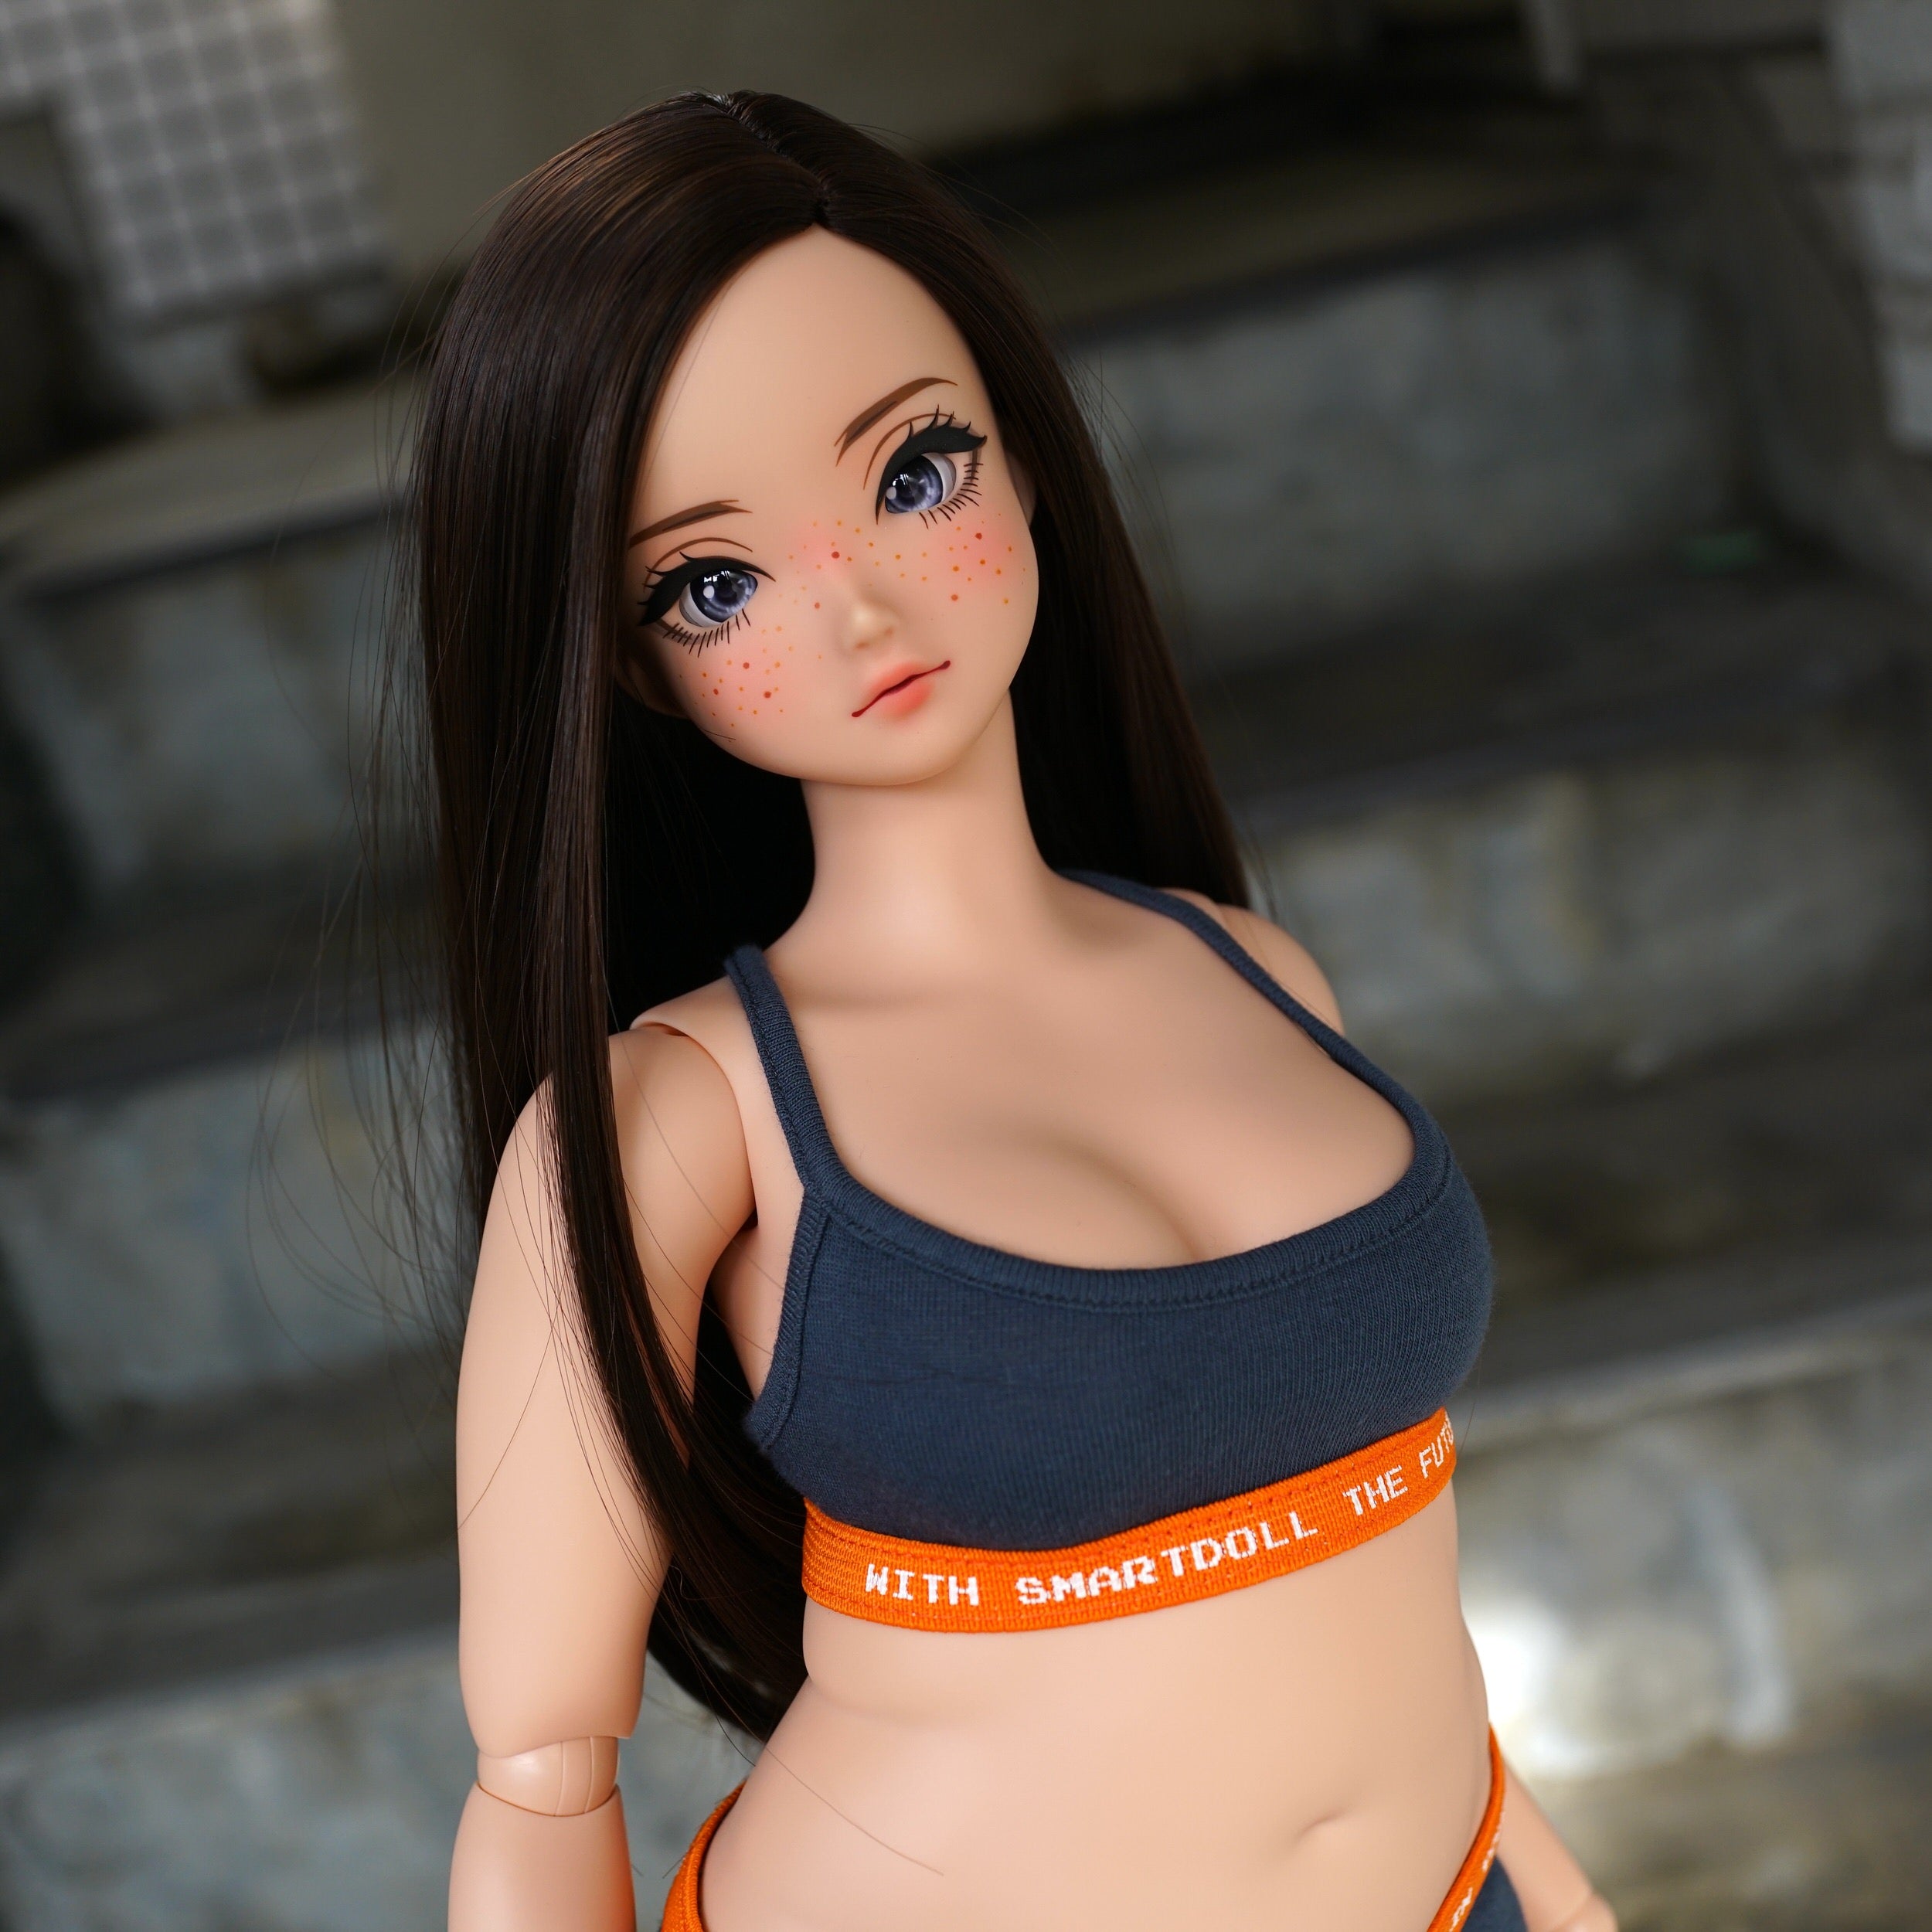 Smart Doll - Live and Let Live (Cinnamon) – Smart Doll Store